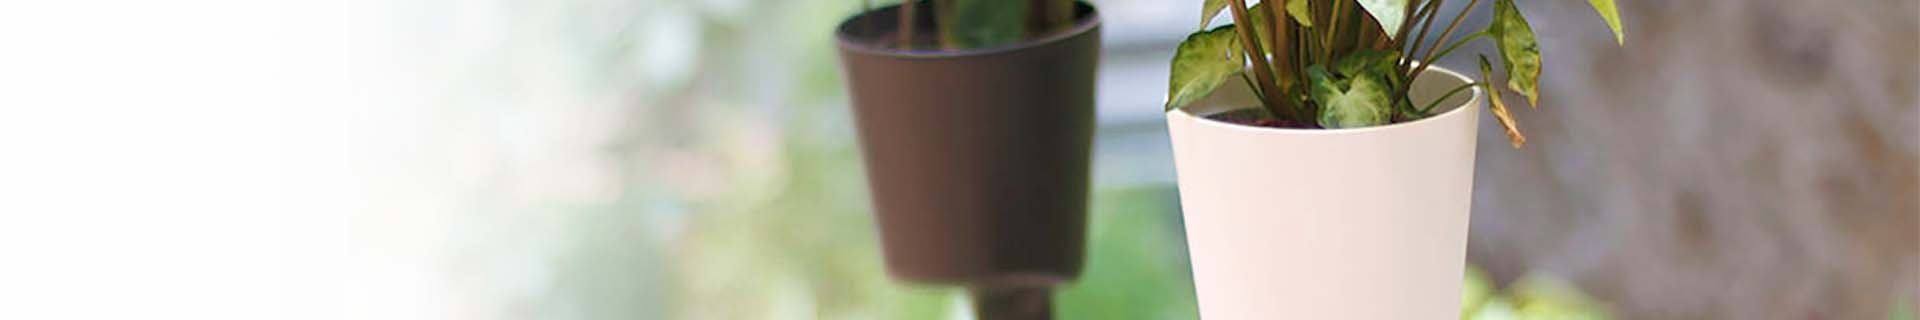 Pack of self-watering vertical planter with plants | CitySens